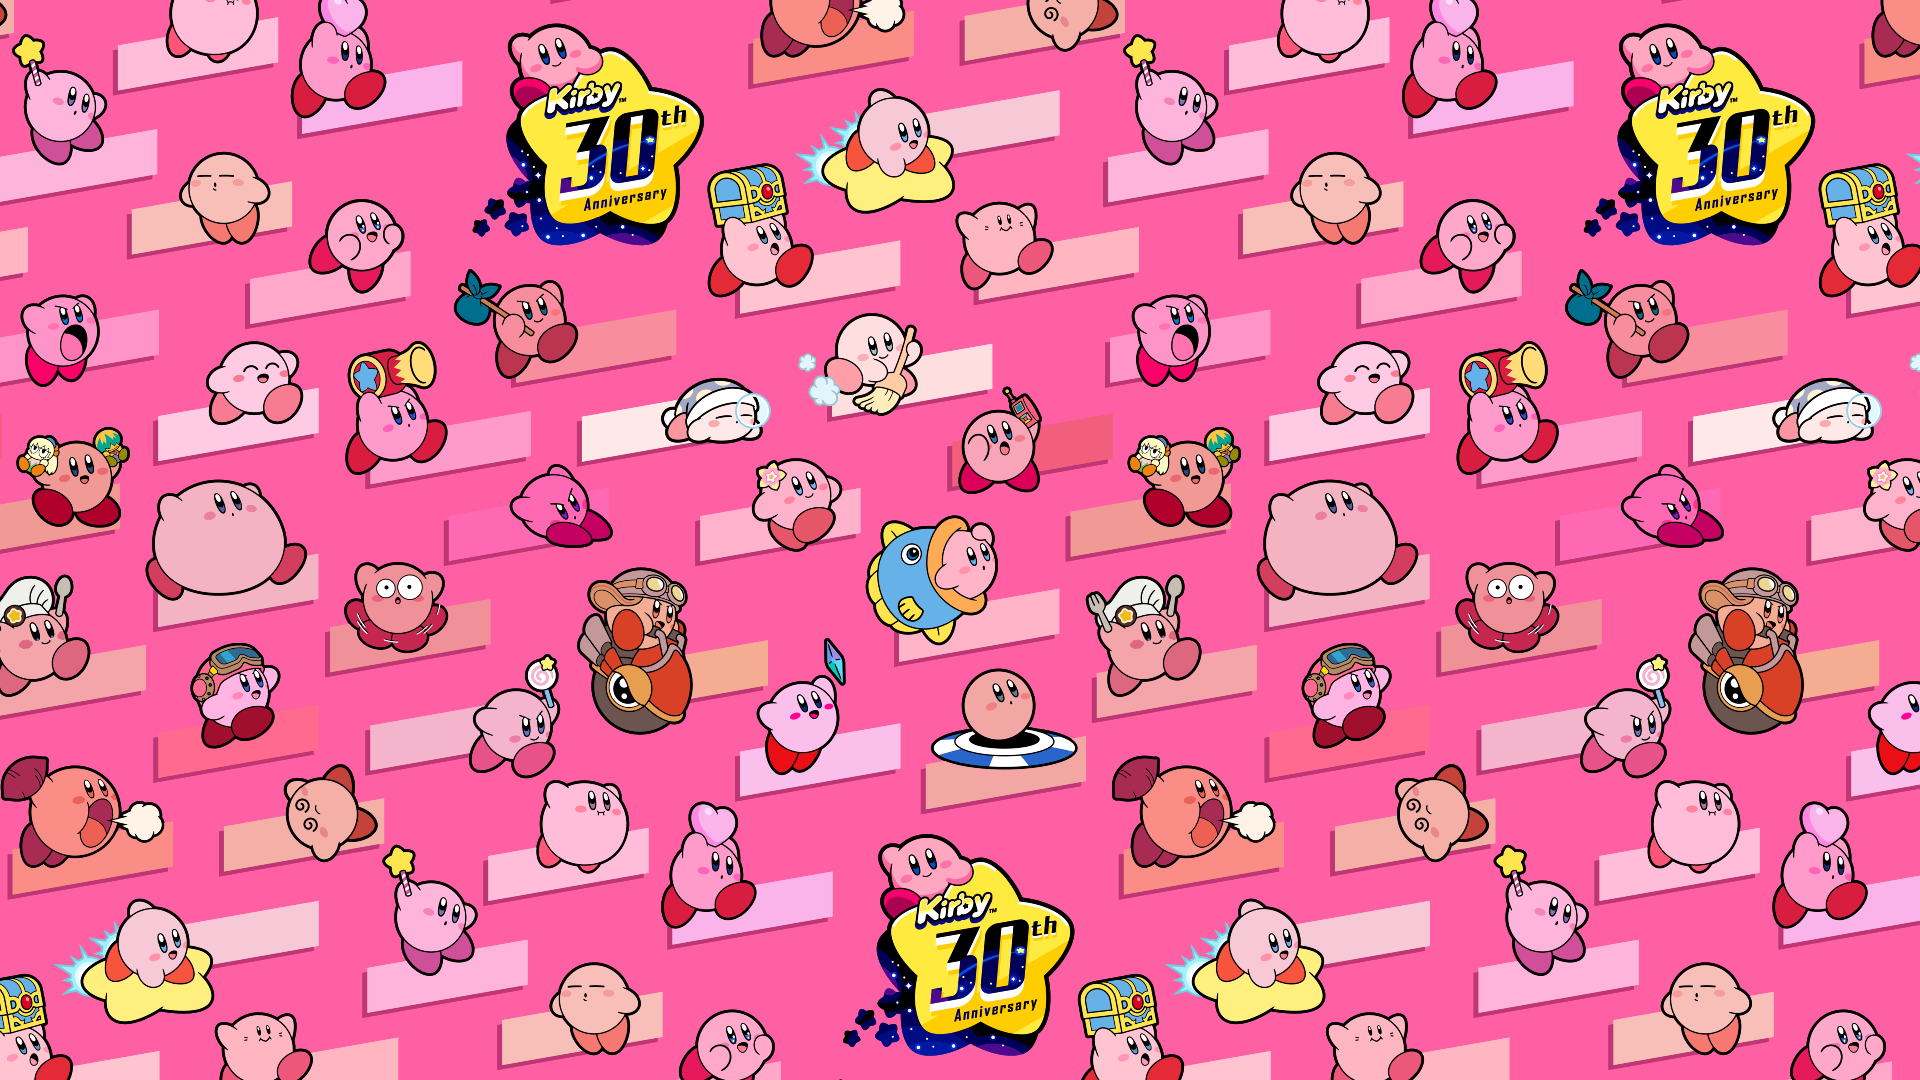 100+] Kirby Wallpapers